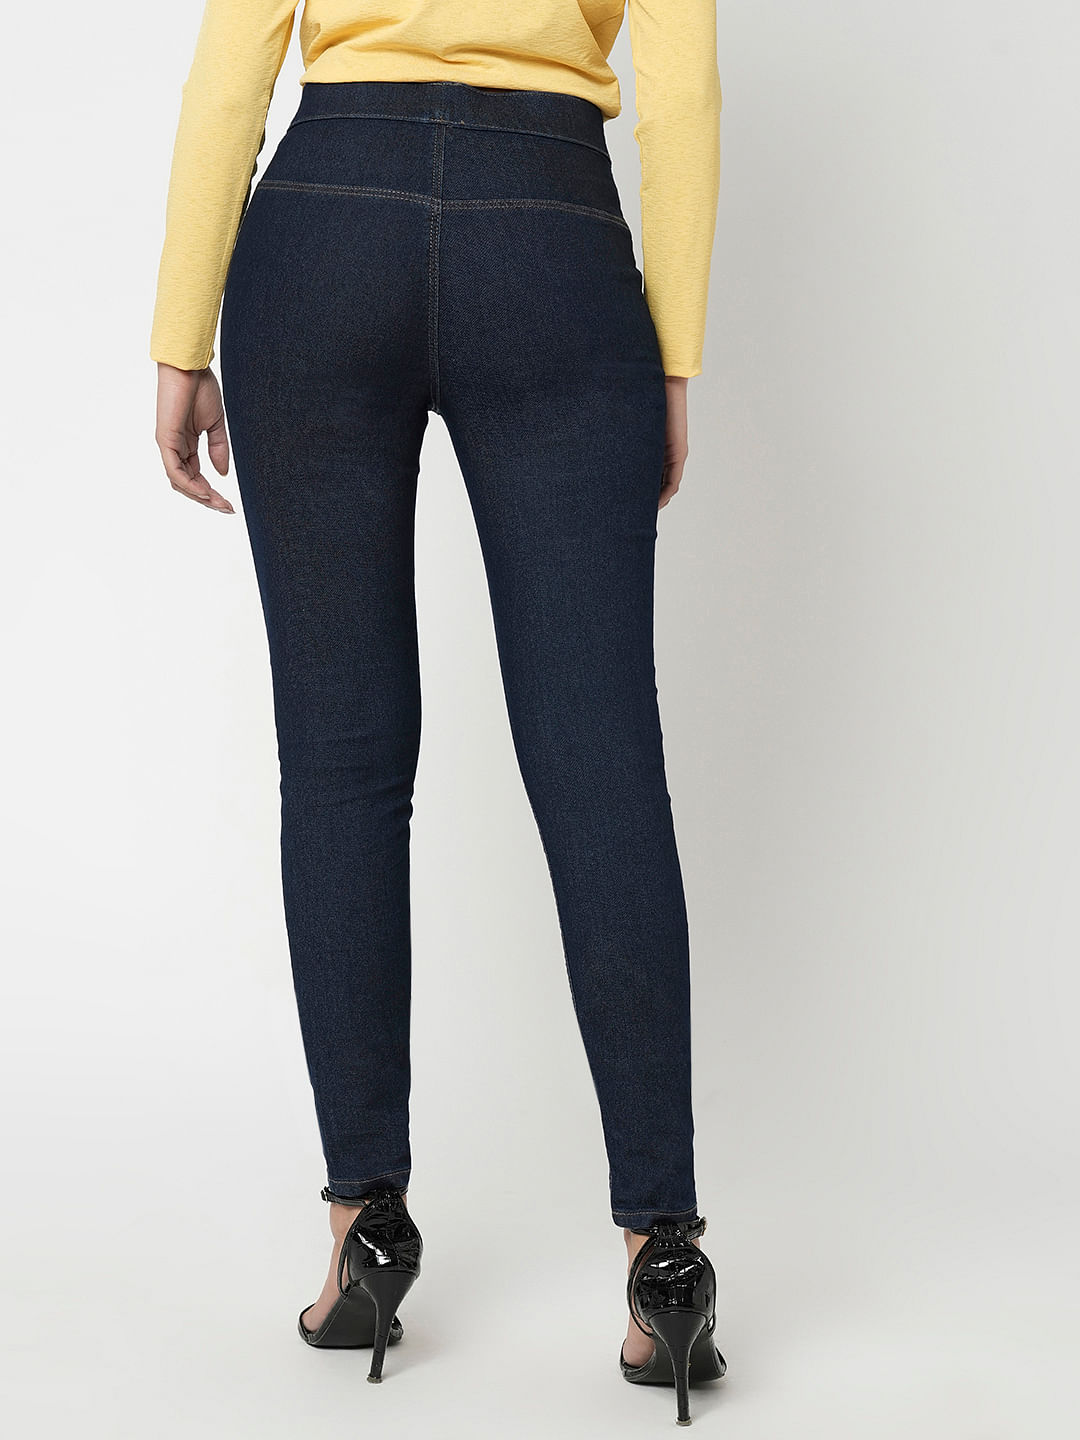 Out Of My Mind Jeggings, Blue – Chic Soul